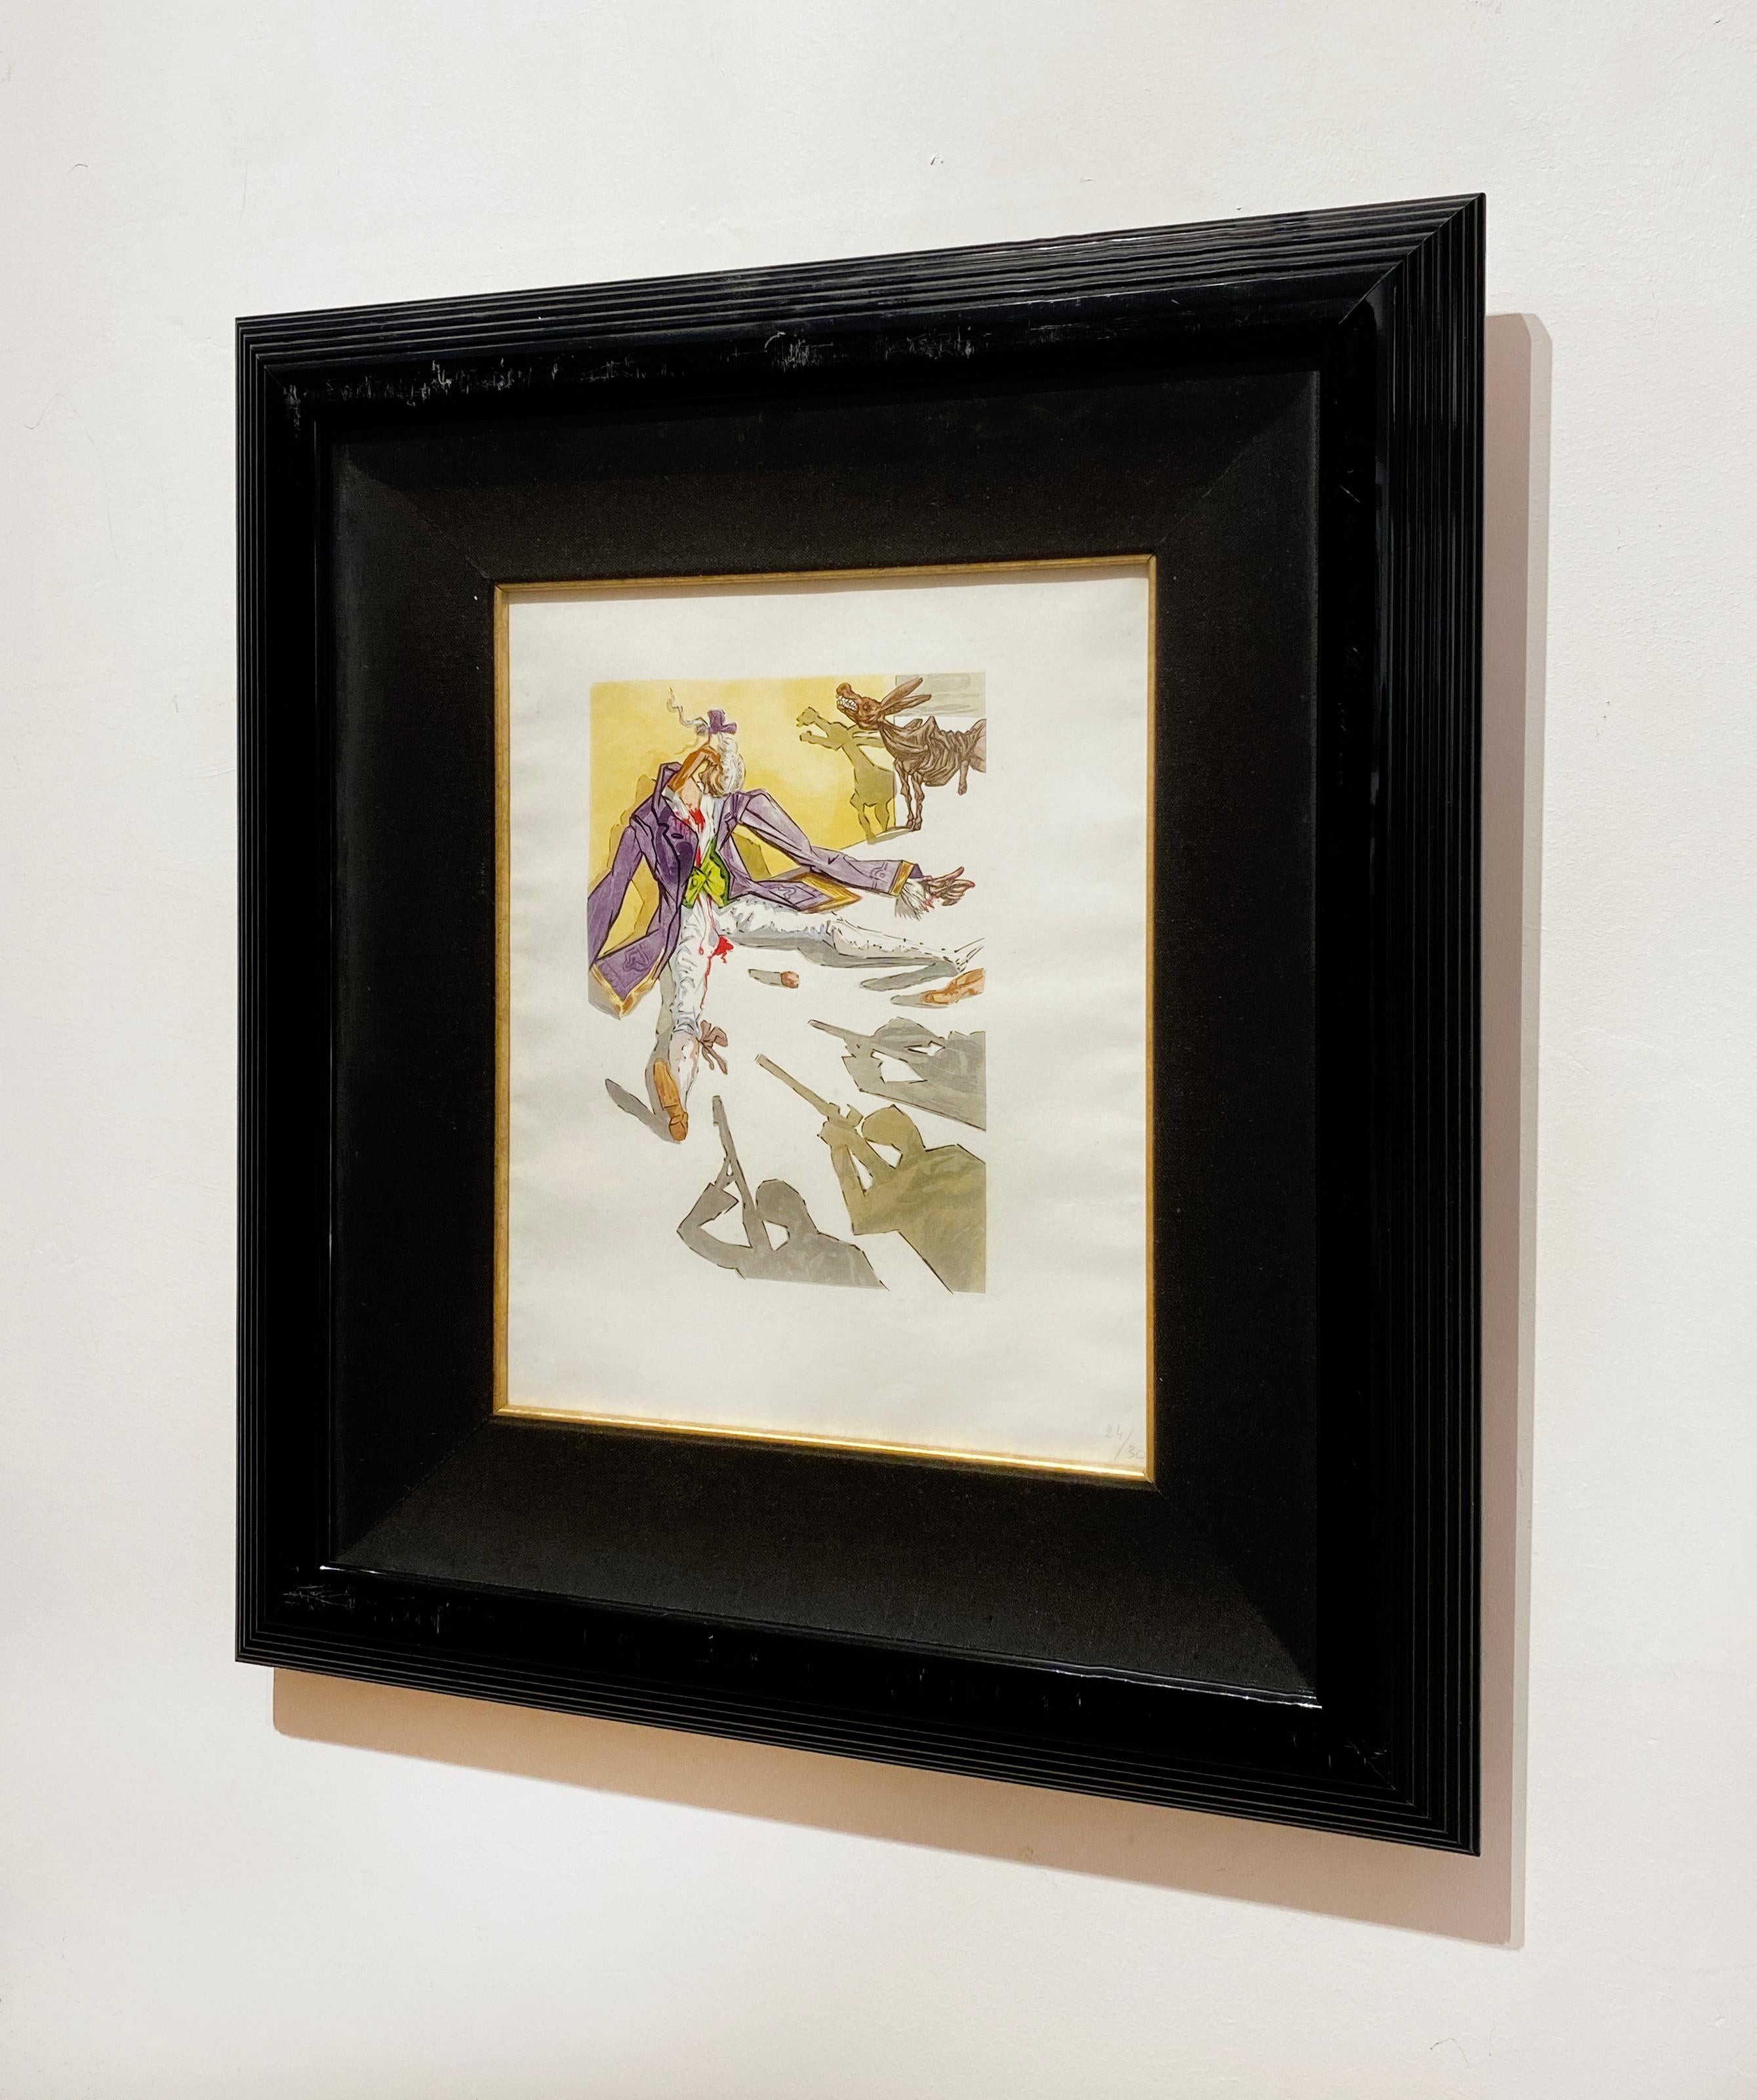 Artist:  Dali, Salvador
Title:  Untitled II (Le Tricorne)
Series:  Le Tricorne (The Three-Pointed Hat)
Date:  1959
Medium:  Wood engraving 
Framed Dimensions:  20